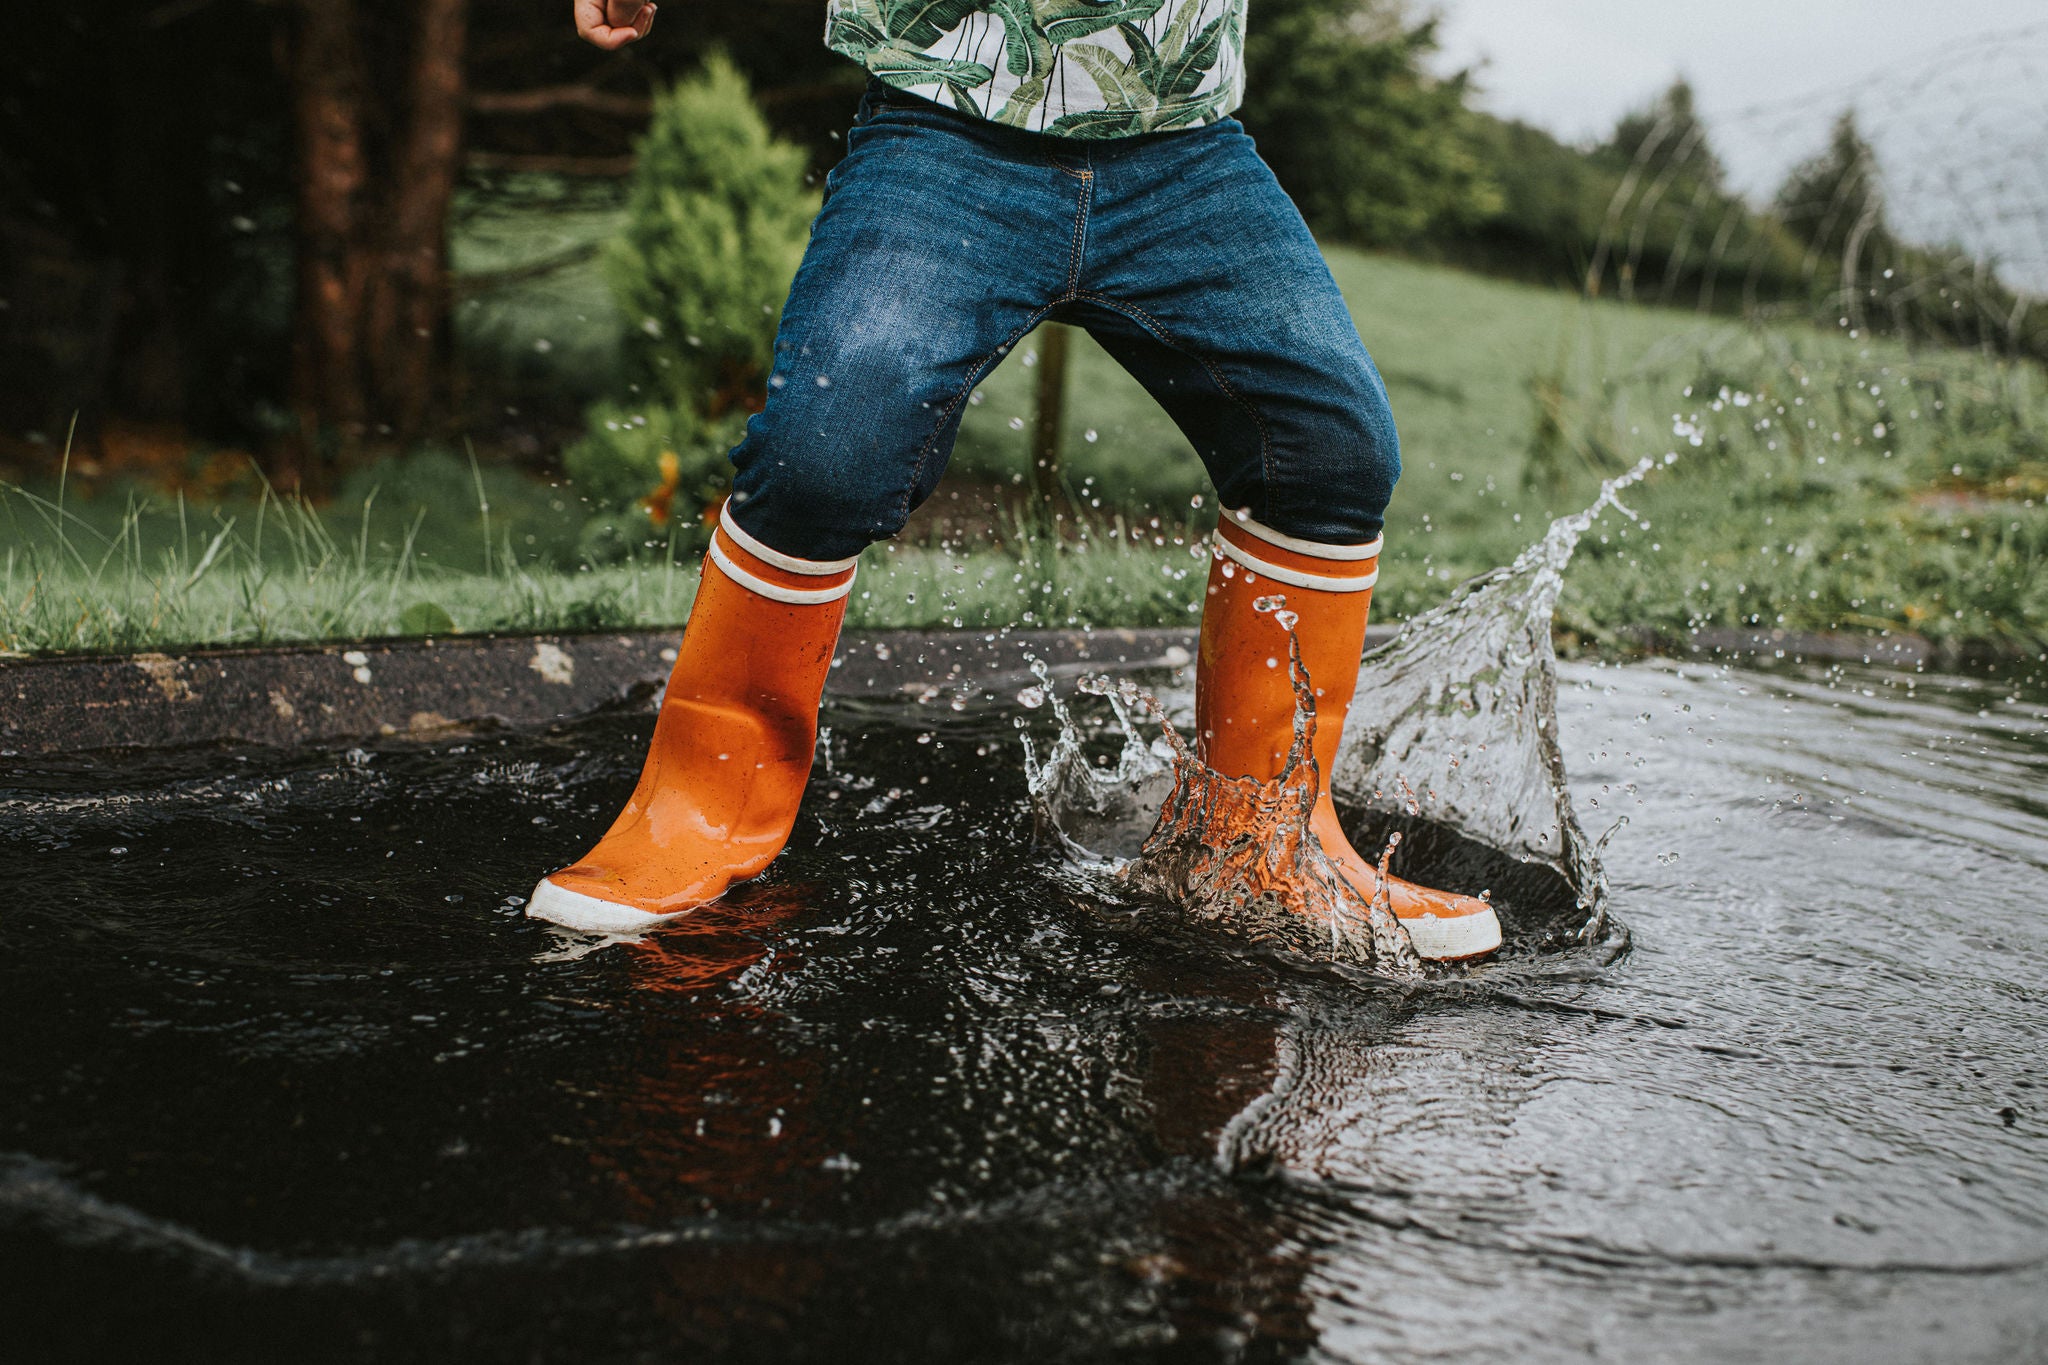 Child wearing orange wellies jumping in a deep puddle